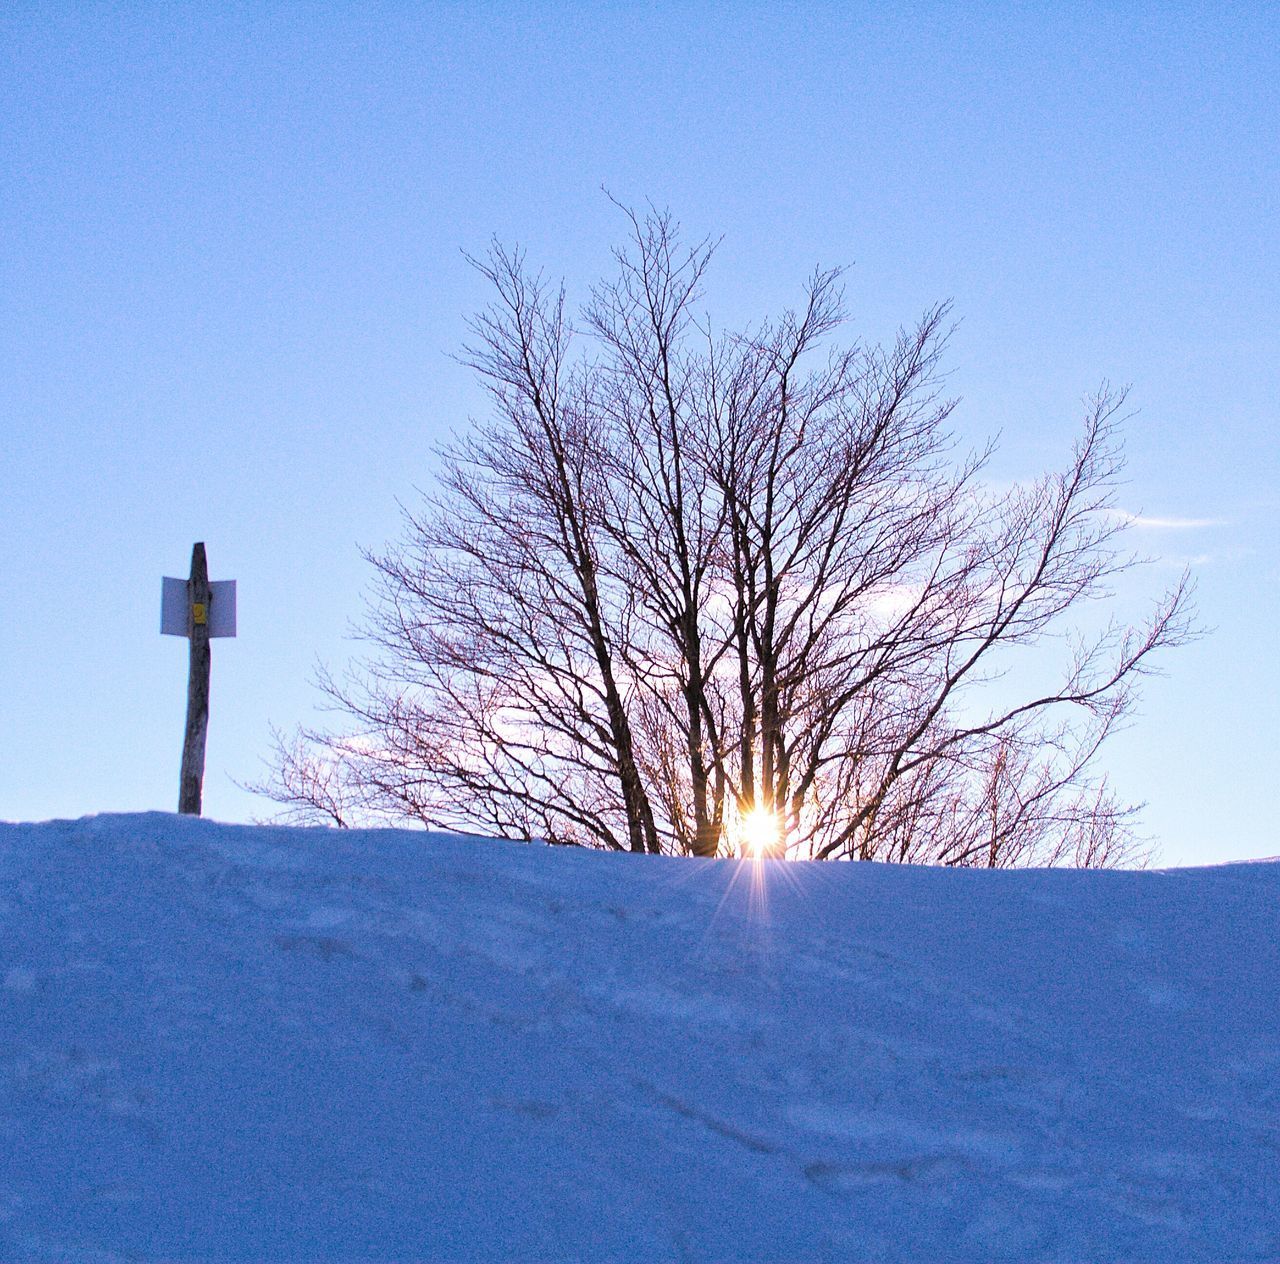 BARE TREE ON SNOW COVERED FIELD AGAINST SKY